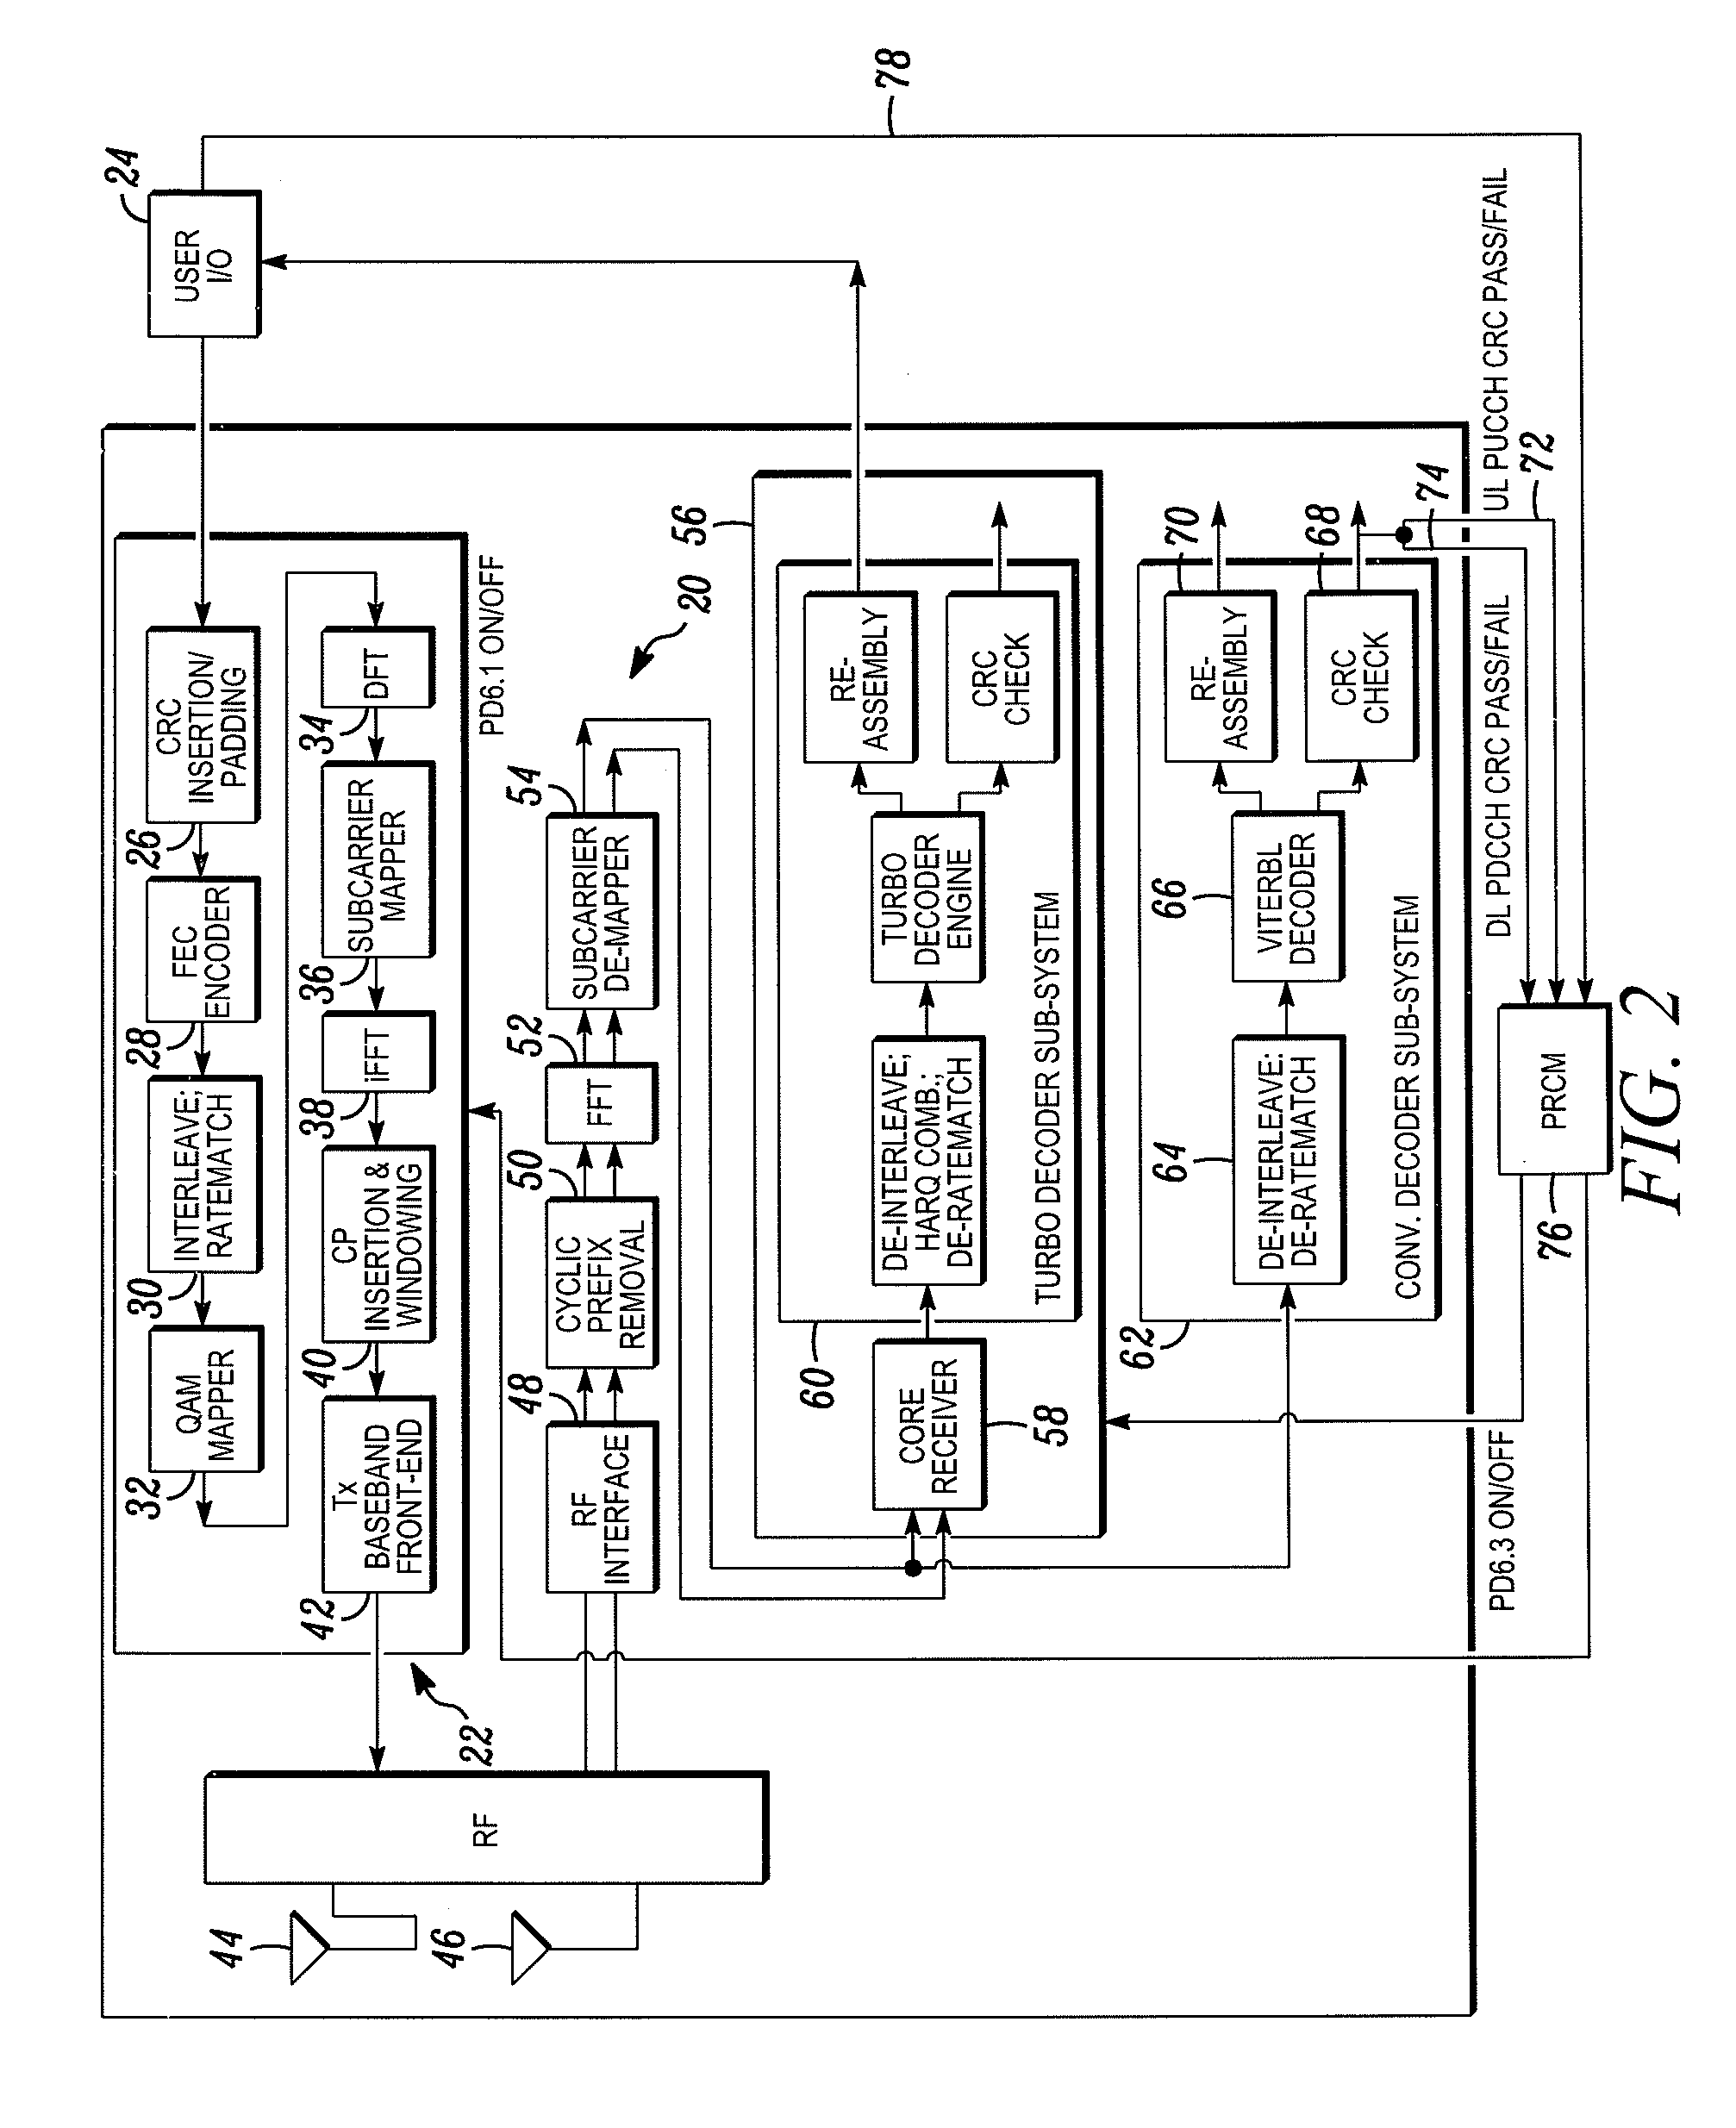 Method and apparatus for reducing power consumption in a wireless device